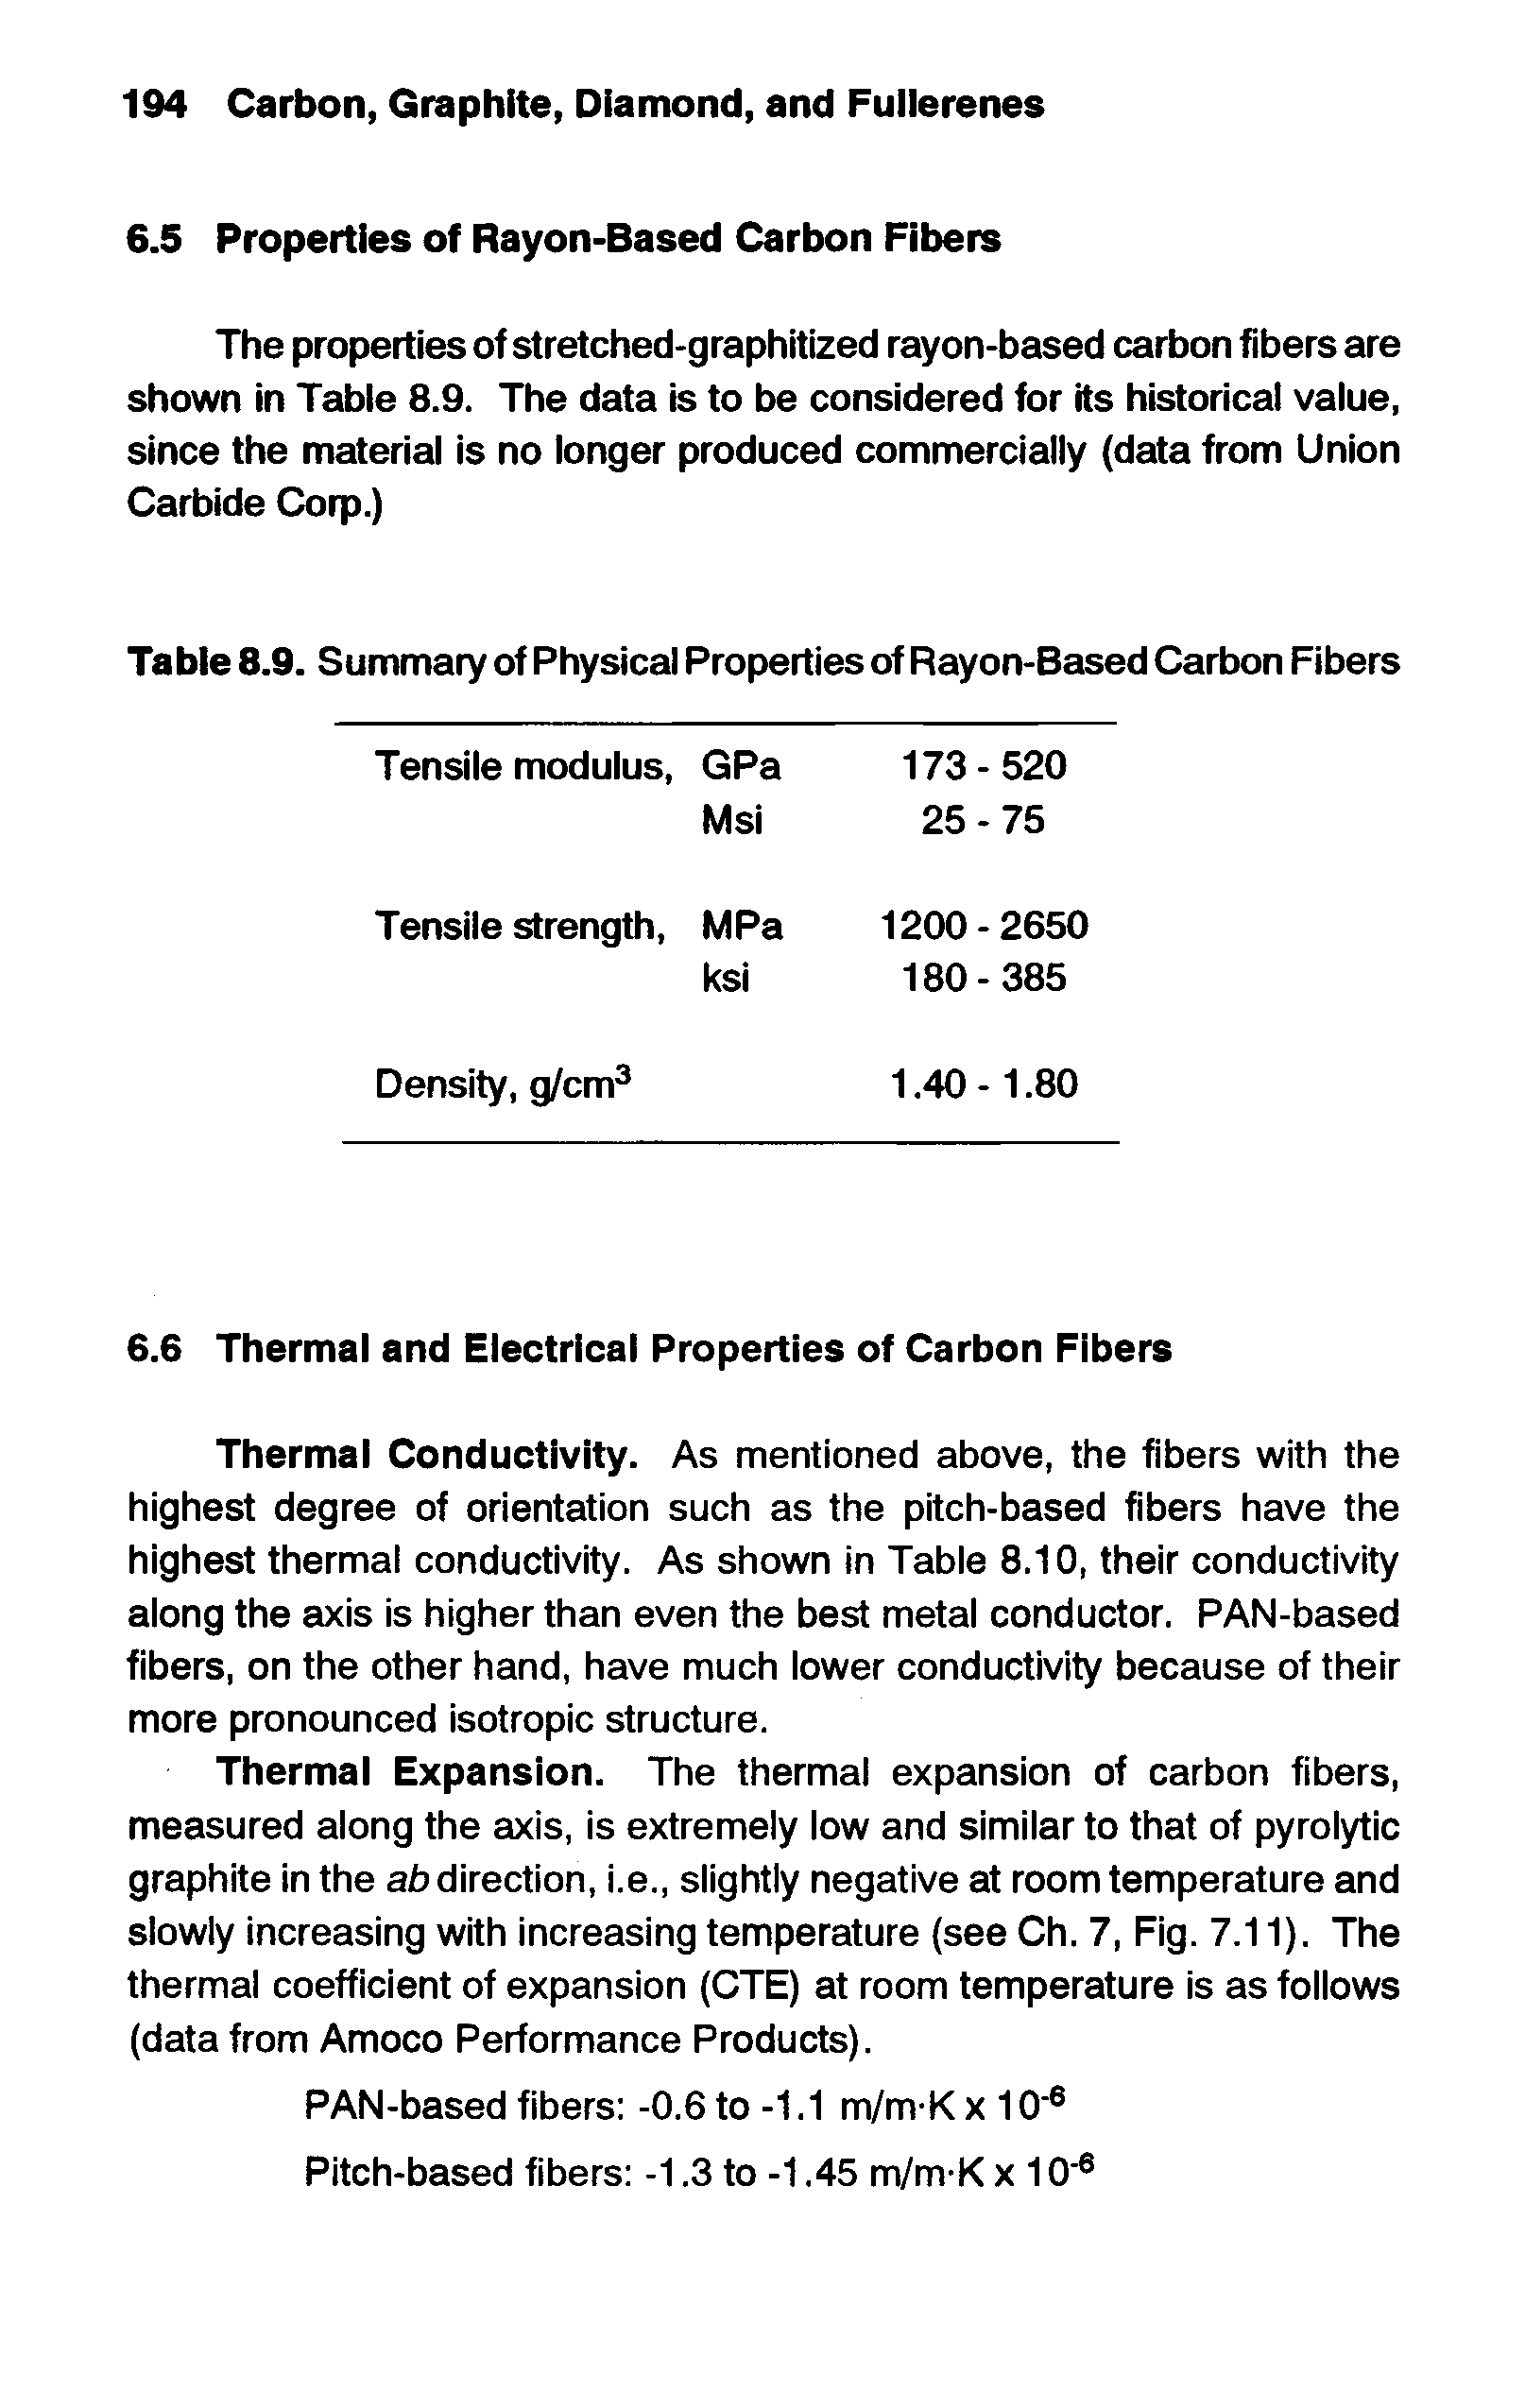 Table 8.9. Summary of Physical Properties of Rayon-Based Carbon Fibers...